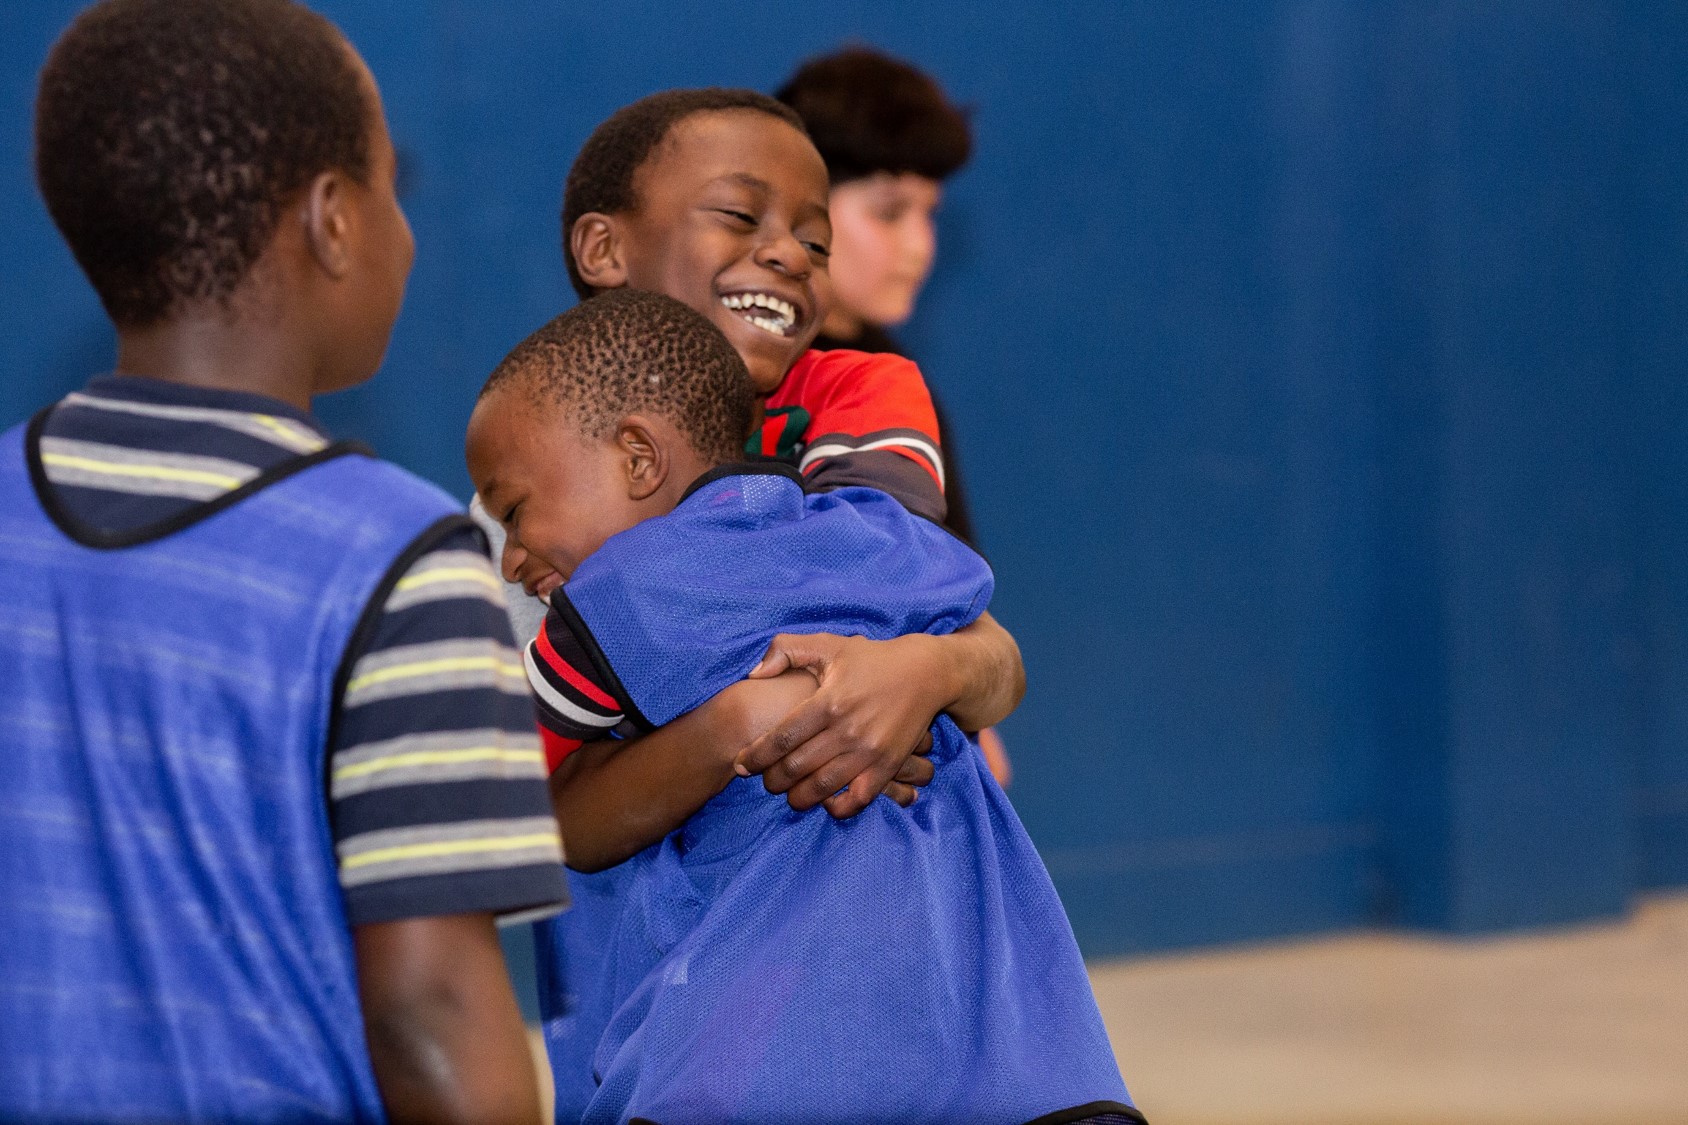 Two young African American boys are grinning and hugging each other. One of them is wearing a blue pinny over his shirt; they are playing a game in a gym setting.